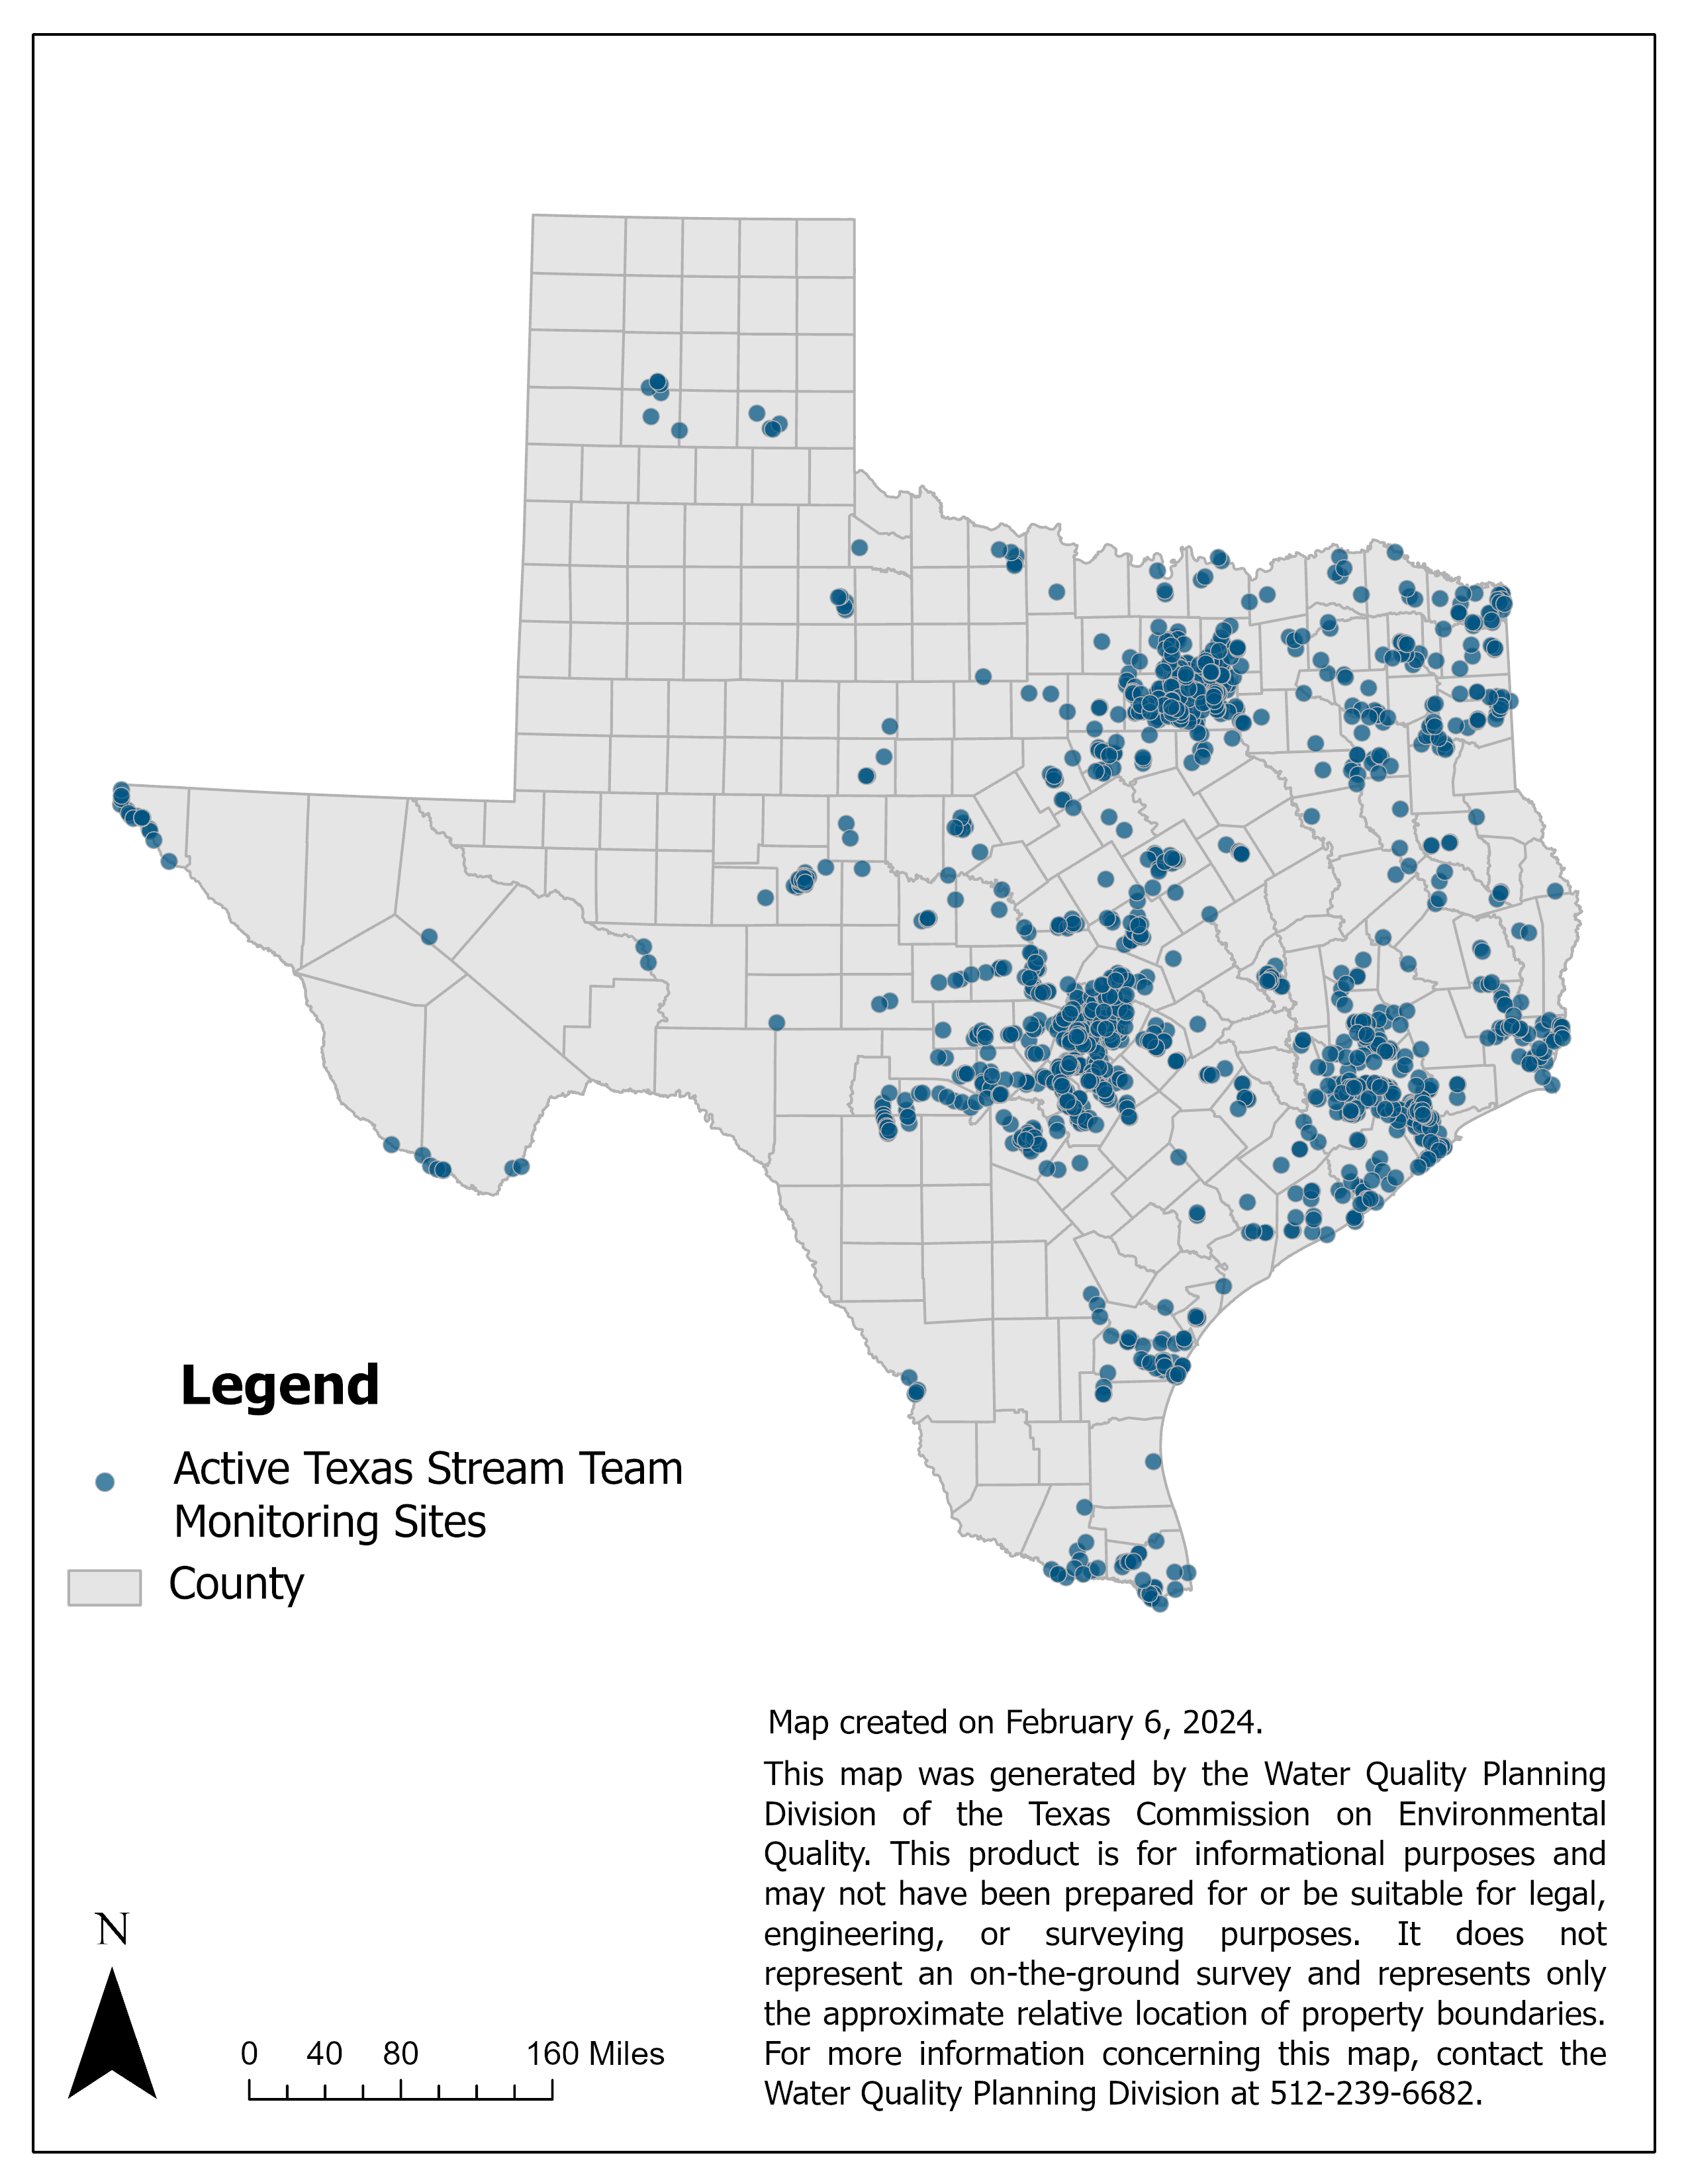 Map of Texas with points where Texas Stream Team has monitoring locations.